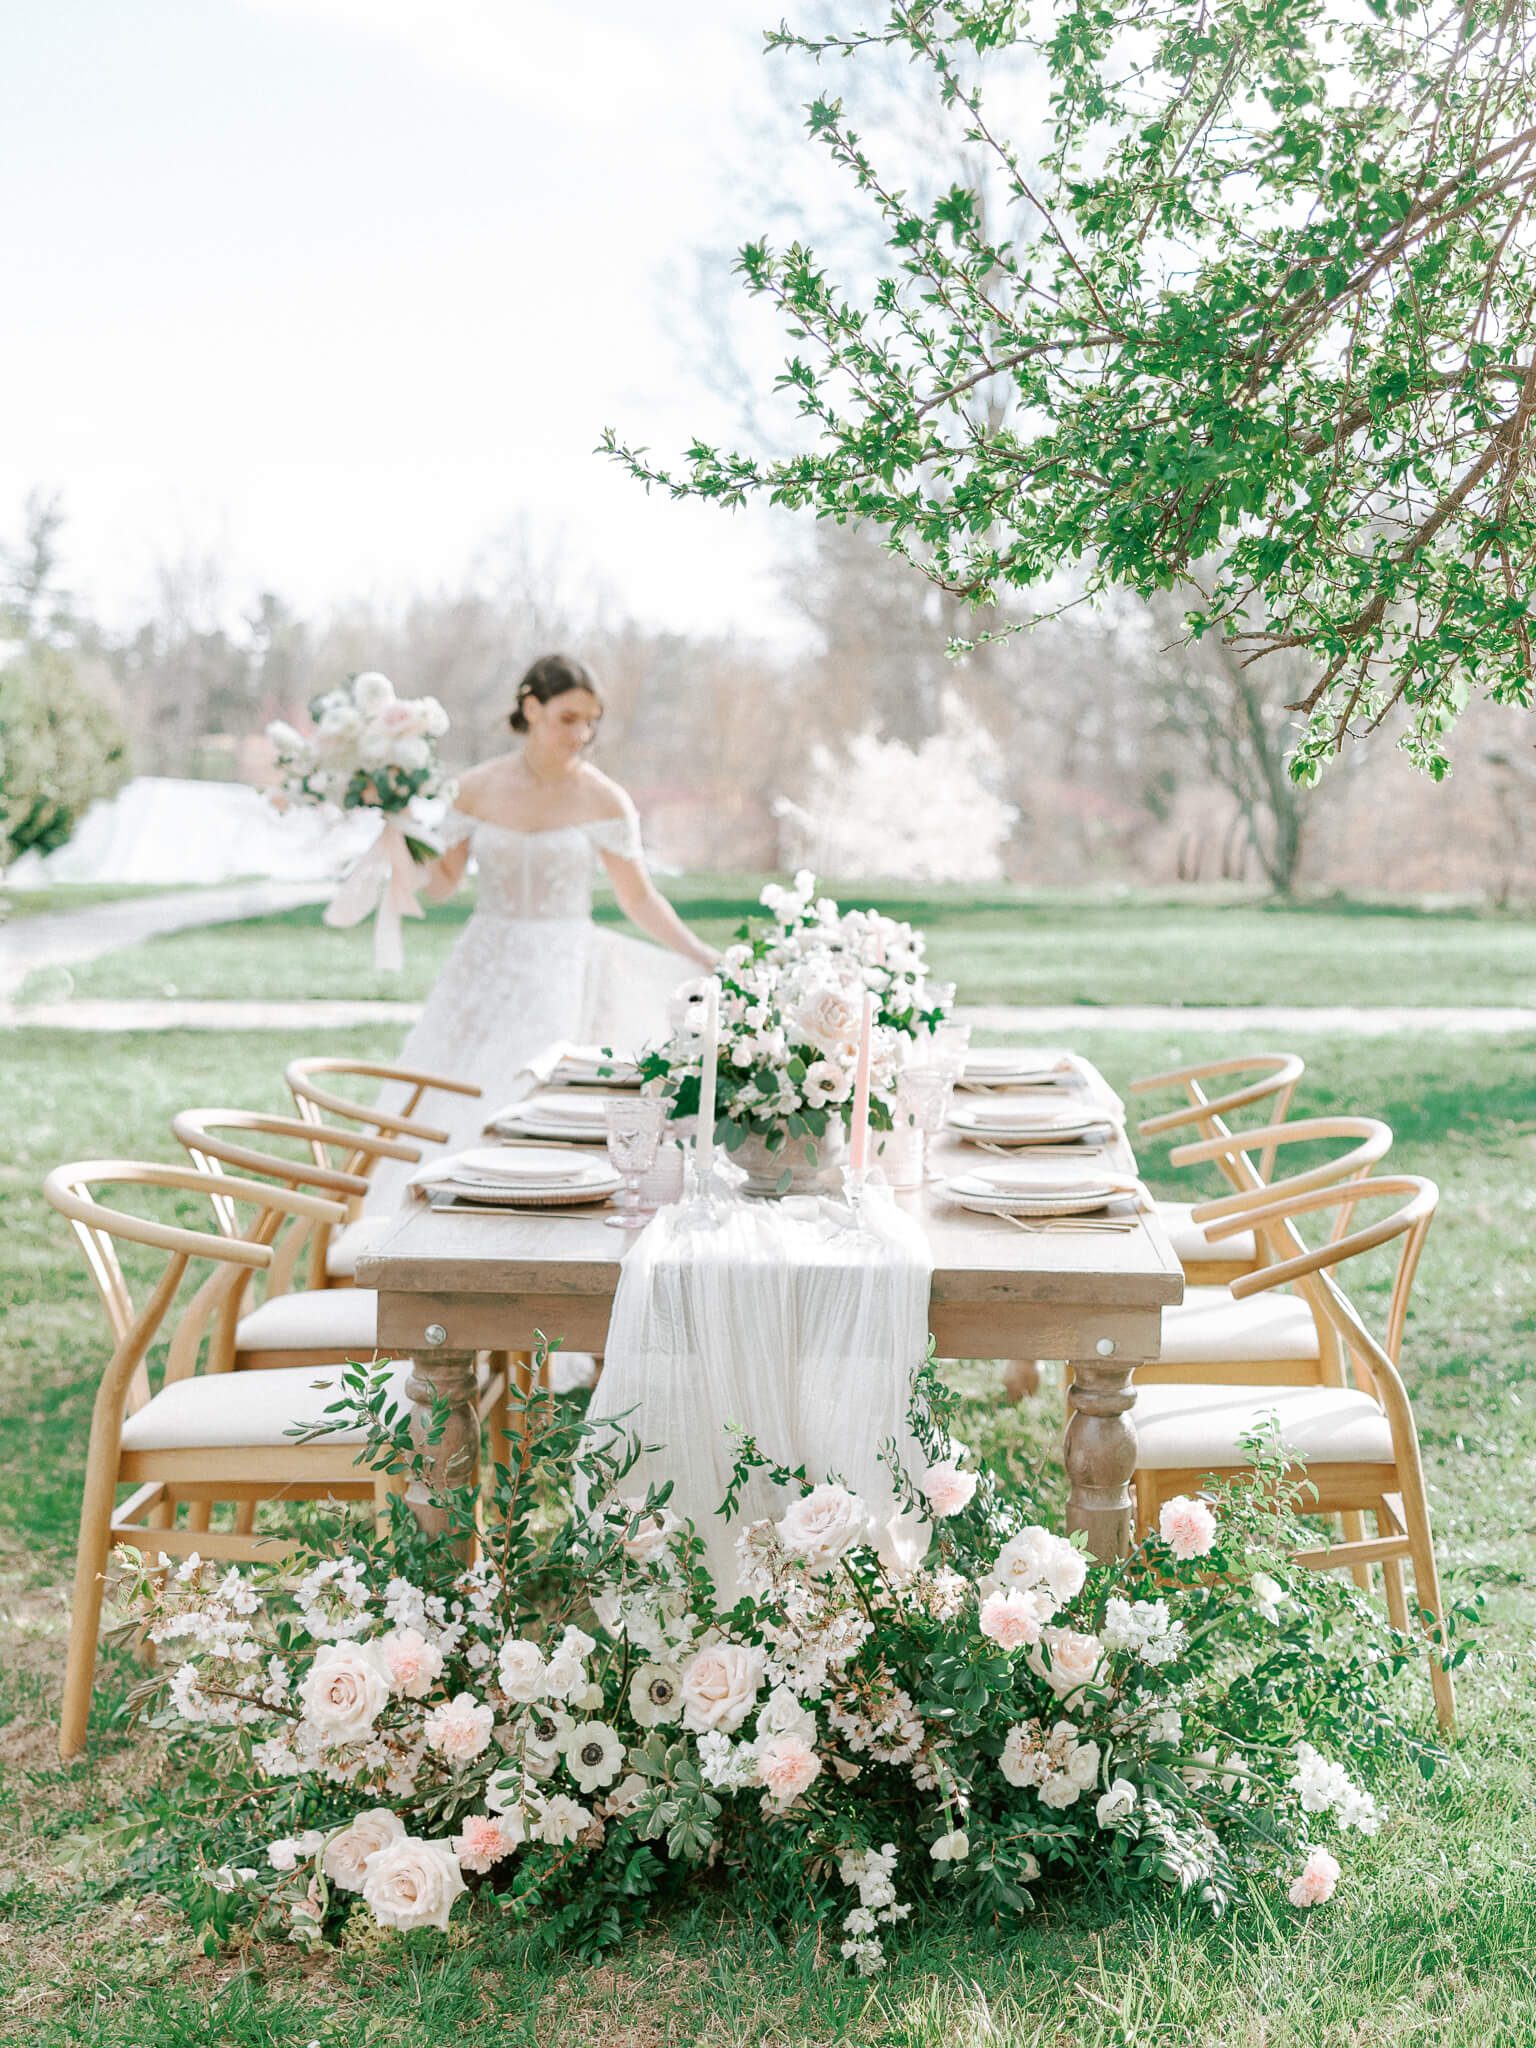 A bride admiring the table decor of blush, whites and greener at an outdoor reception.